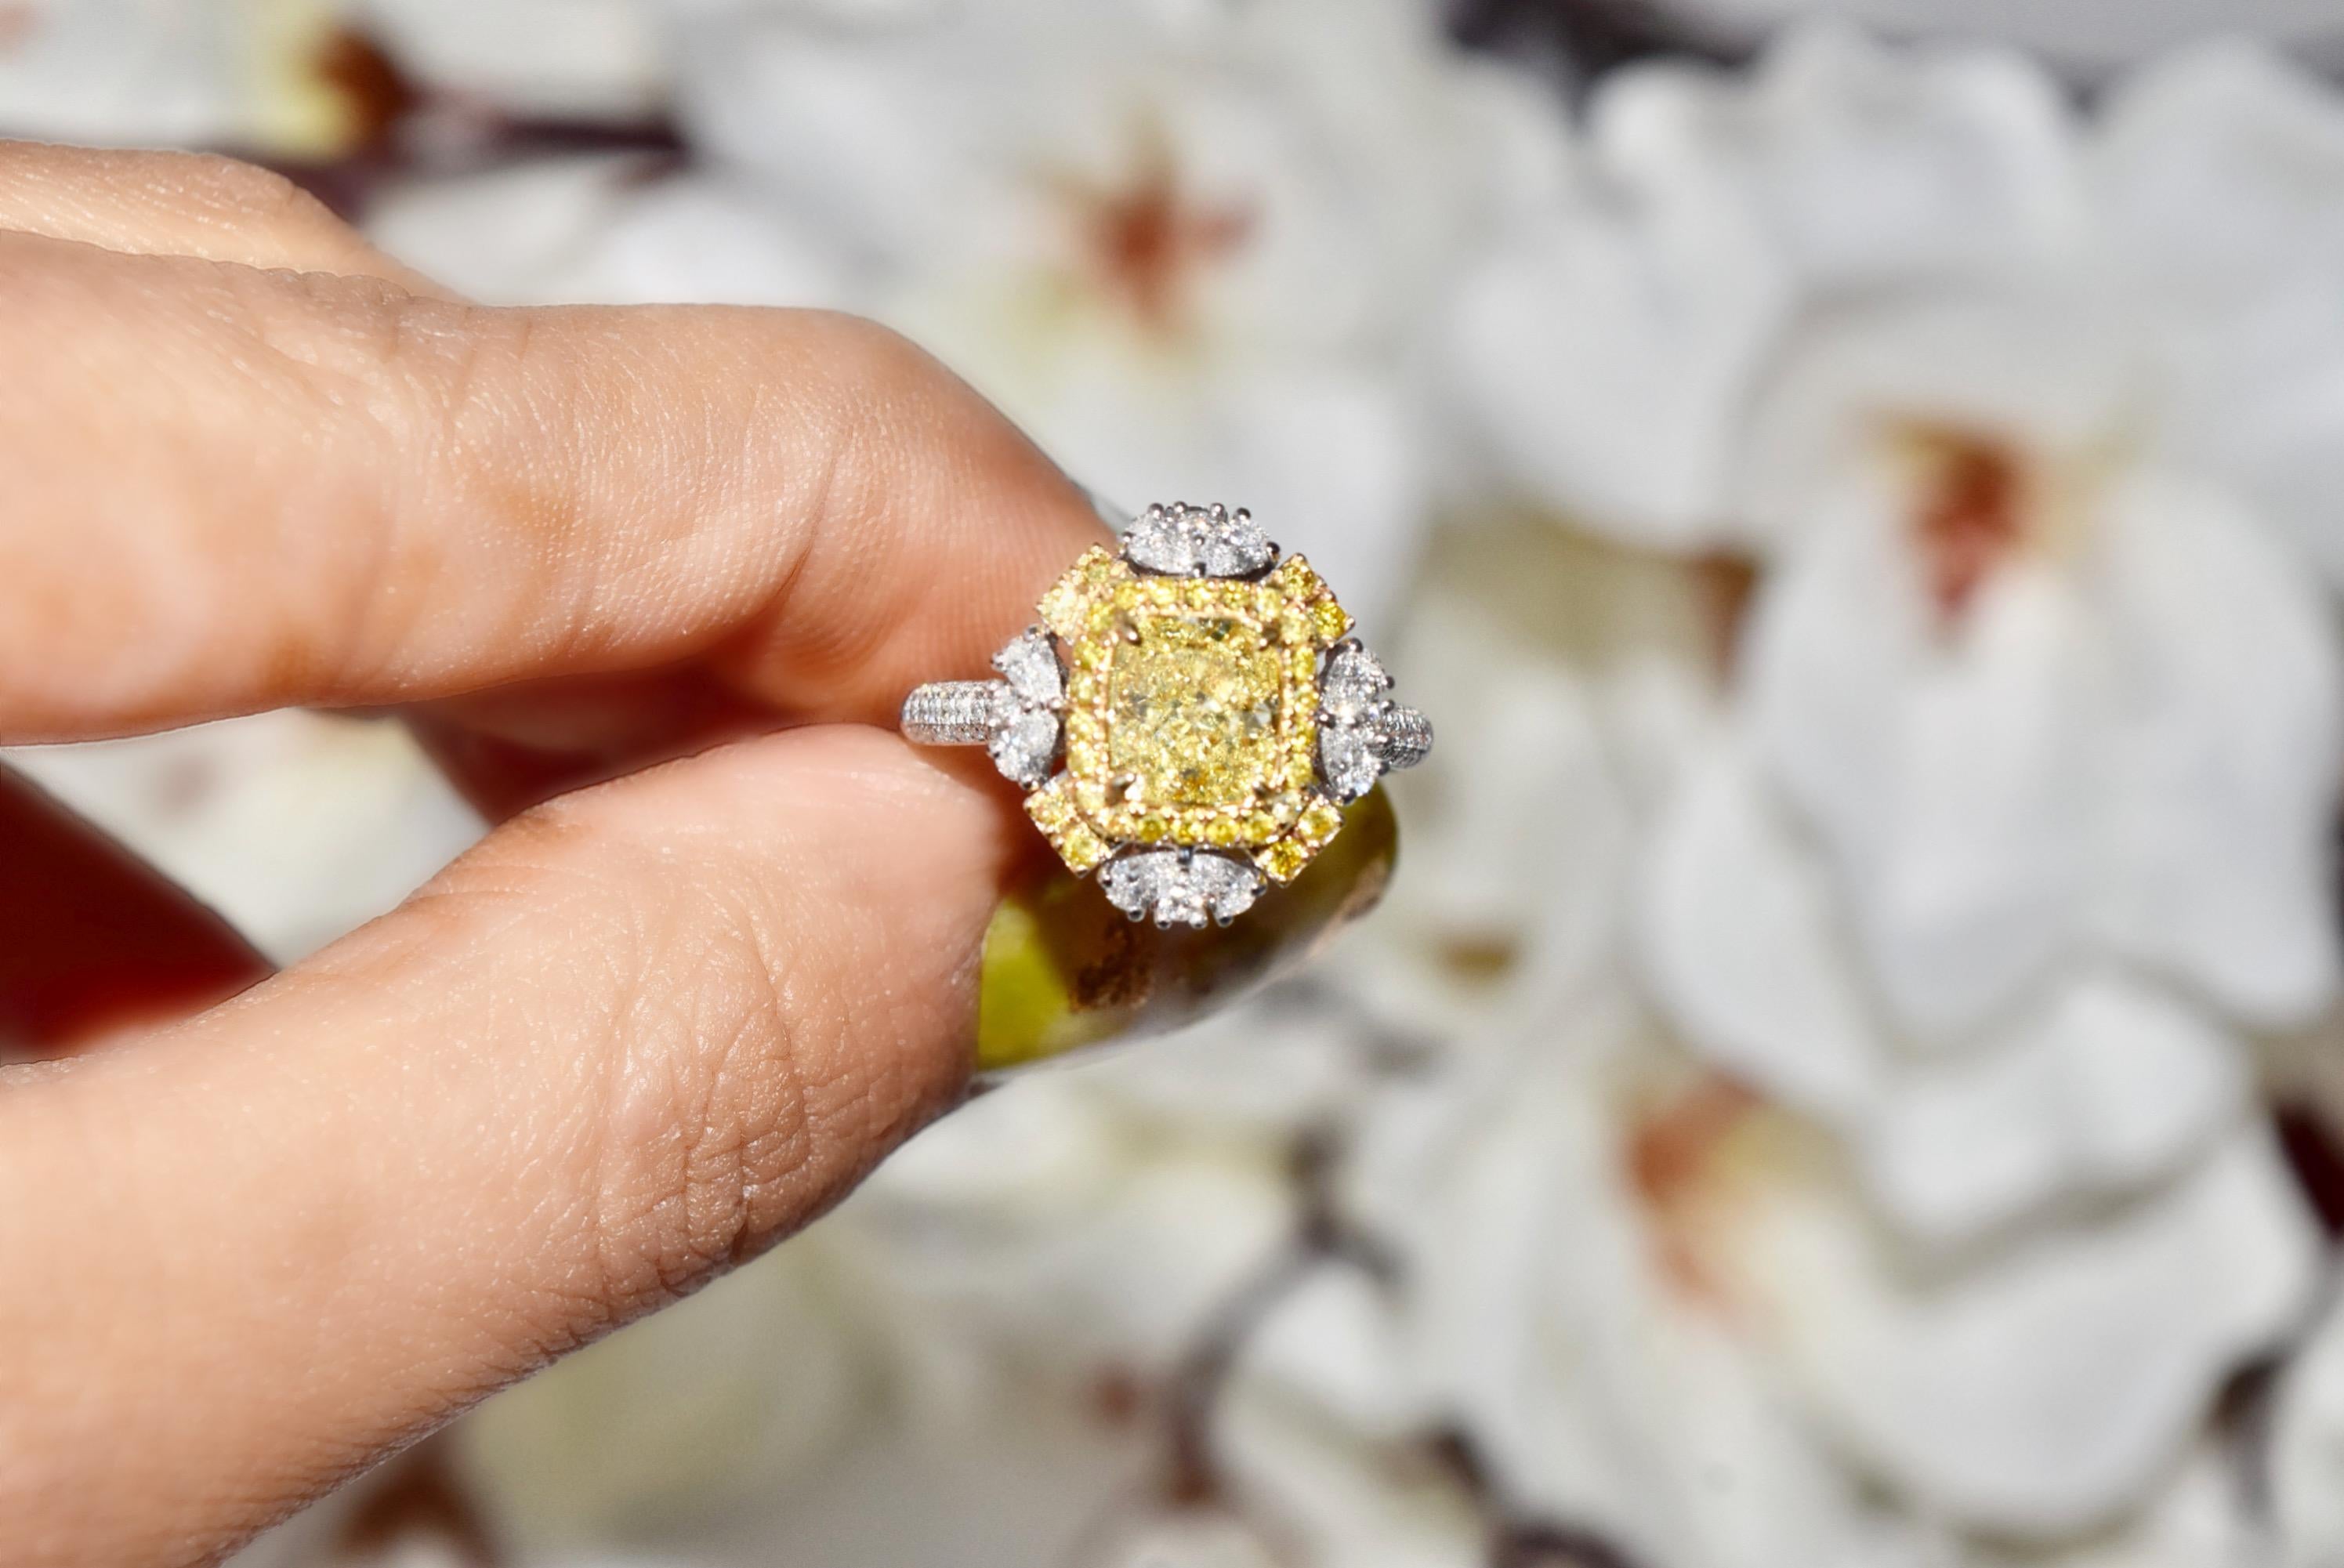 **100% NATURAL FANCY COLOUR DIAMOND JEWELRY**

✪ Jewelry Details ✪

♦ MAIN STONE DETAILS

➛ Stone Shape: Cushion
➛ Stone Color: Fancy Intense Yellow
➛ Stone Clarity: SI1
➛ Stone Weight: 1.26 carats
➛ GIA certified

♦ SIDE STONE DETAILS

➛ Side white